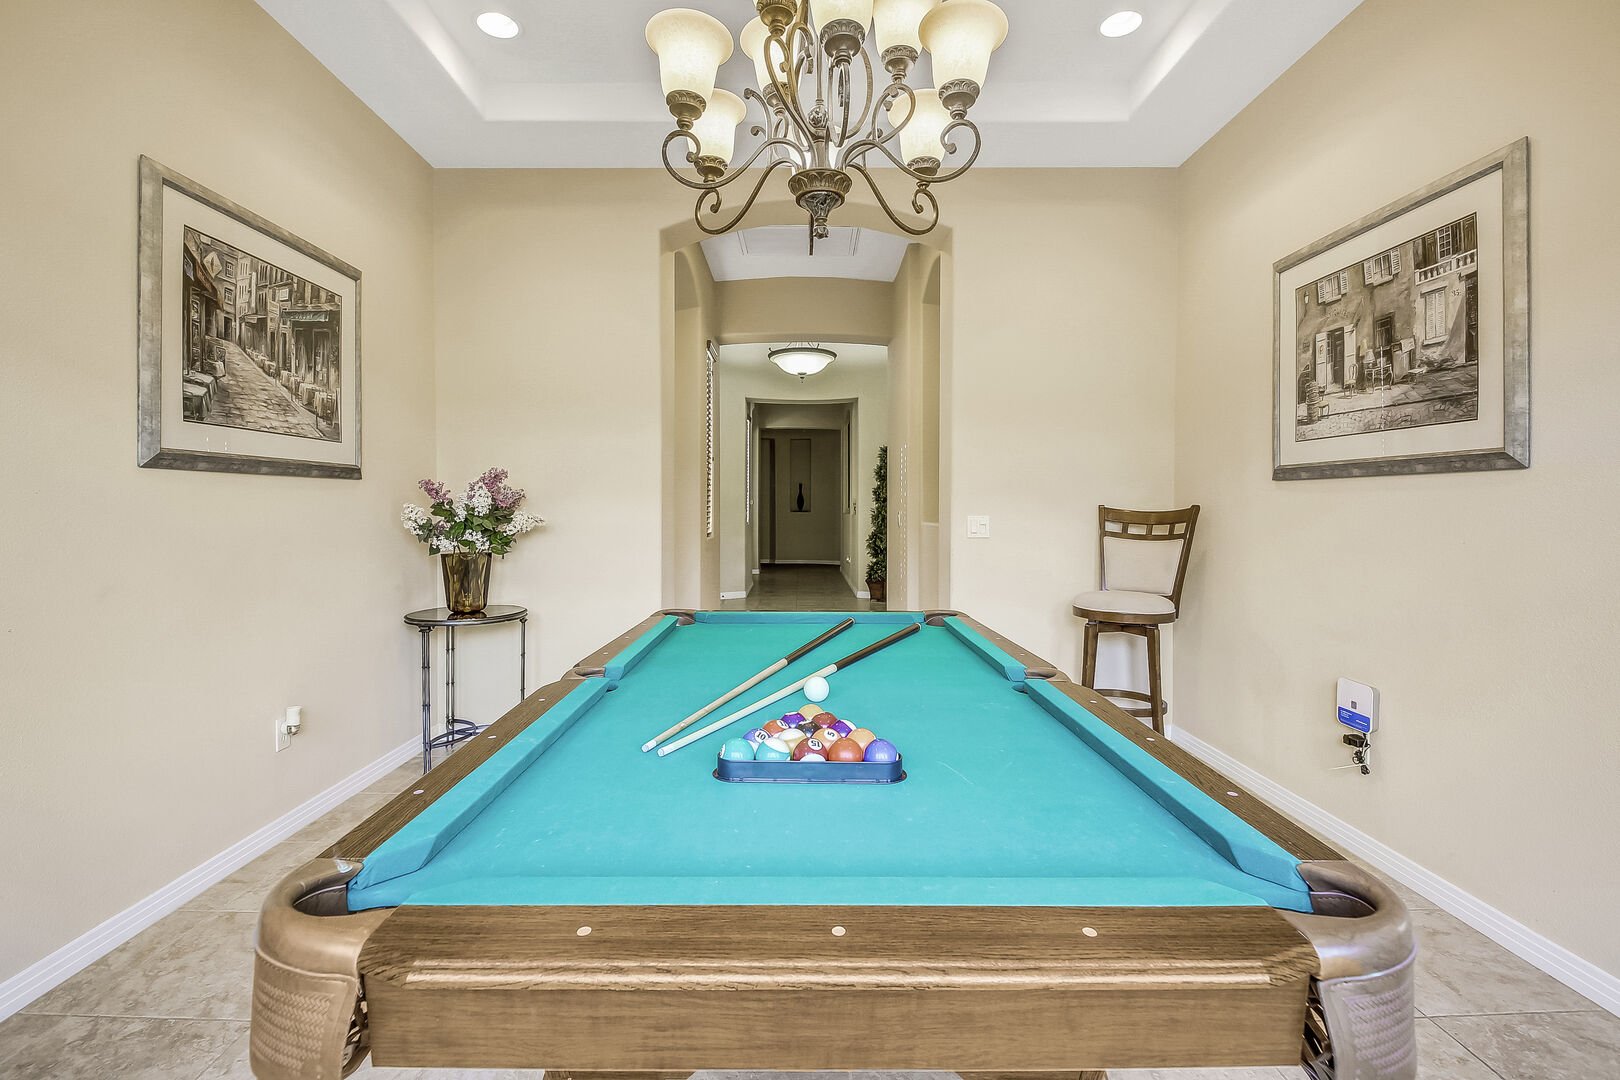 A pool table is waiting for you to play a few rounds of 8-Ball.